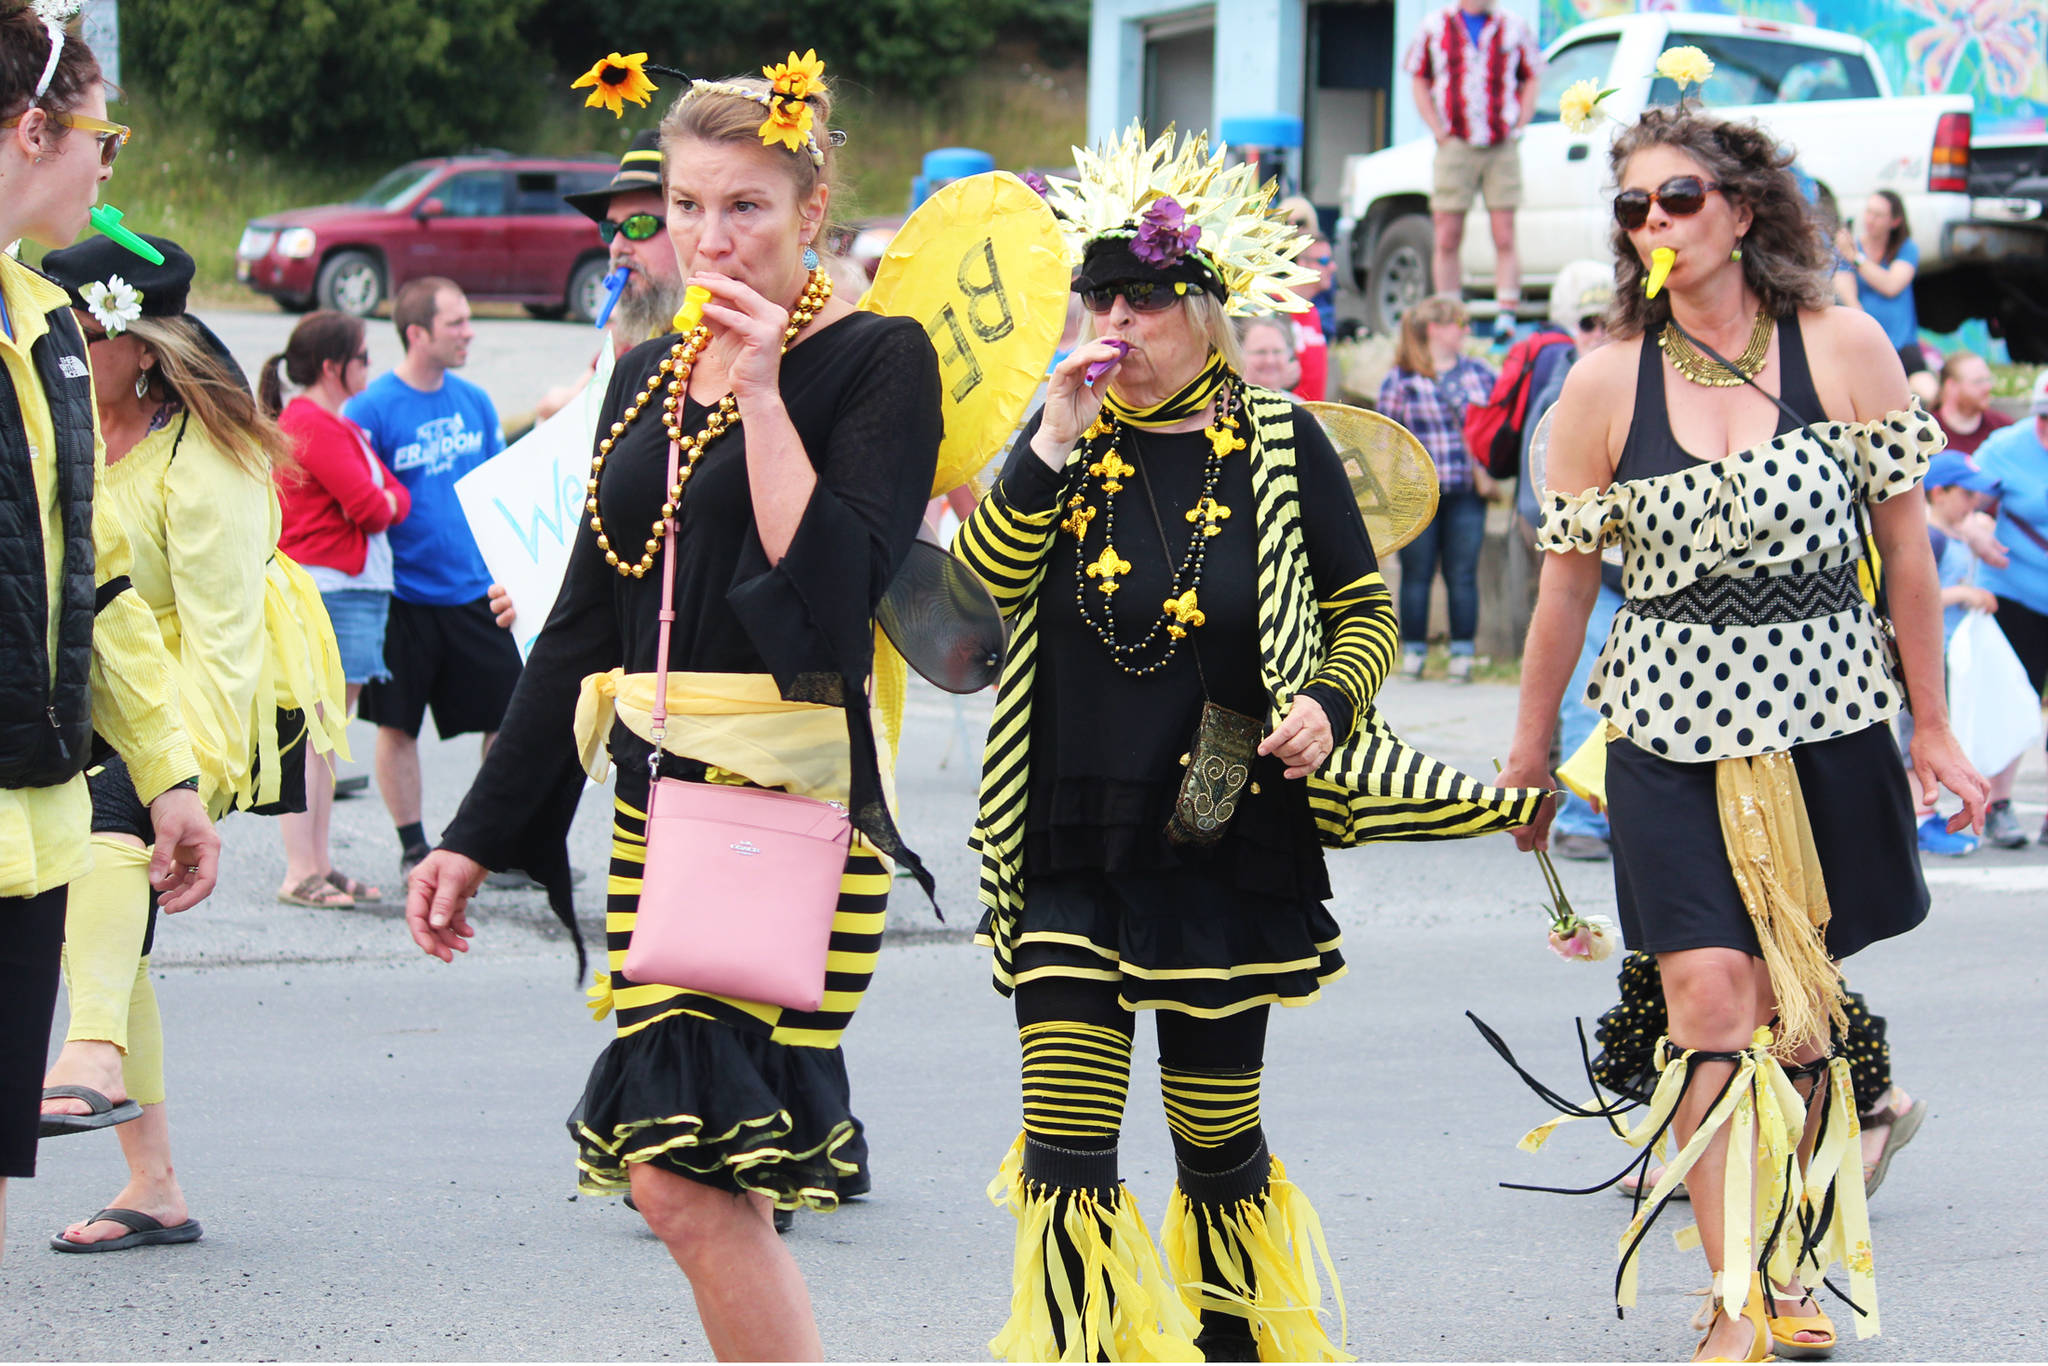 A group of parade participants marsh dressed as bees to raise awareness for supporting the insects and agriculture in general during this year’s July Fourth parade Thursday, July 4, 2019 on Pioneer Avenue in Homer, Alaska. (Photo by Megan Pacer/Homer News)